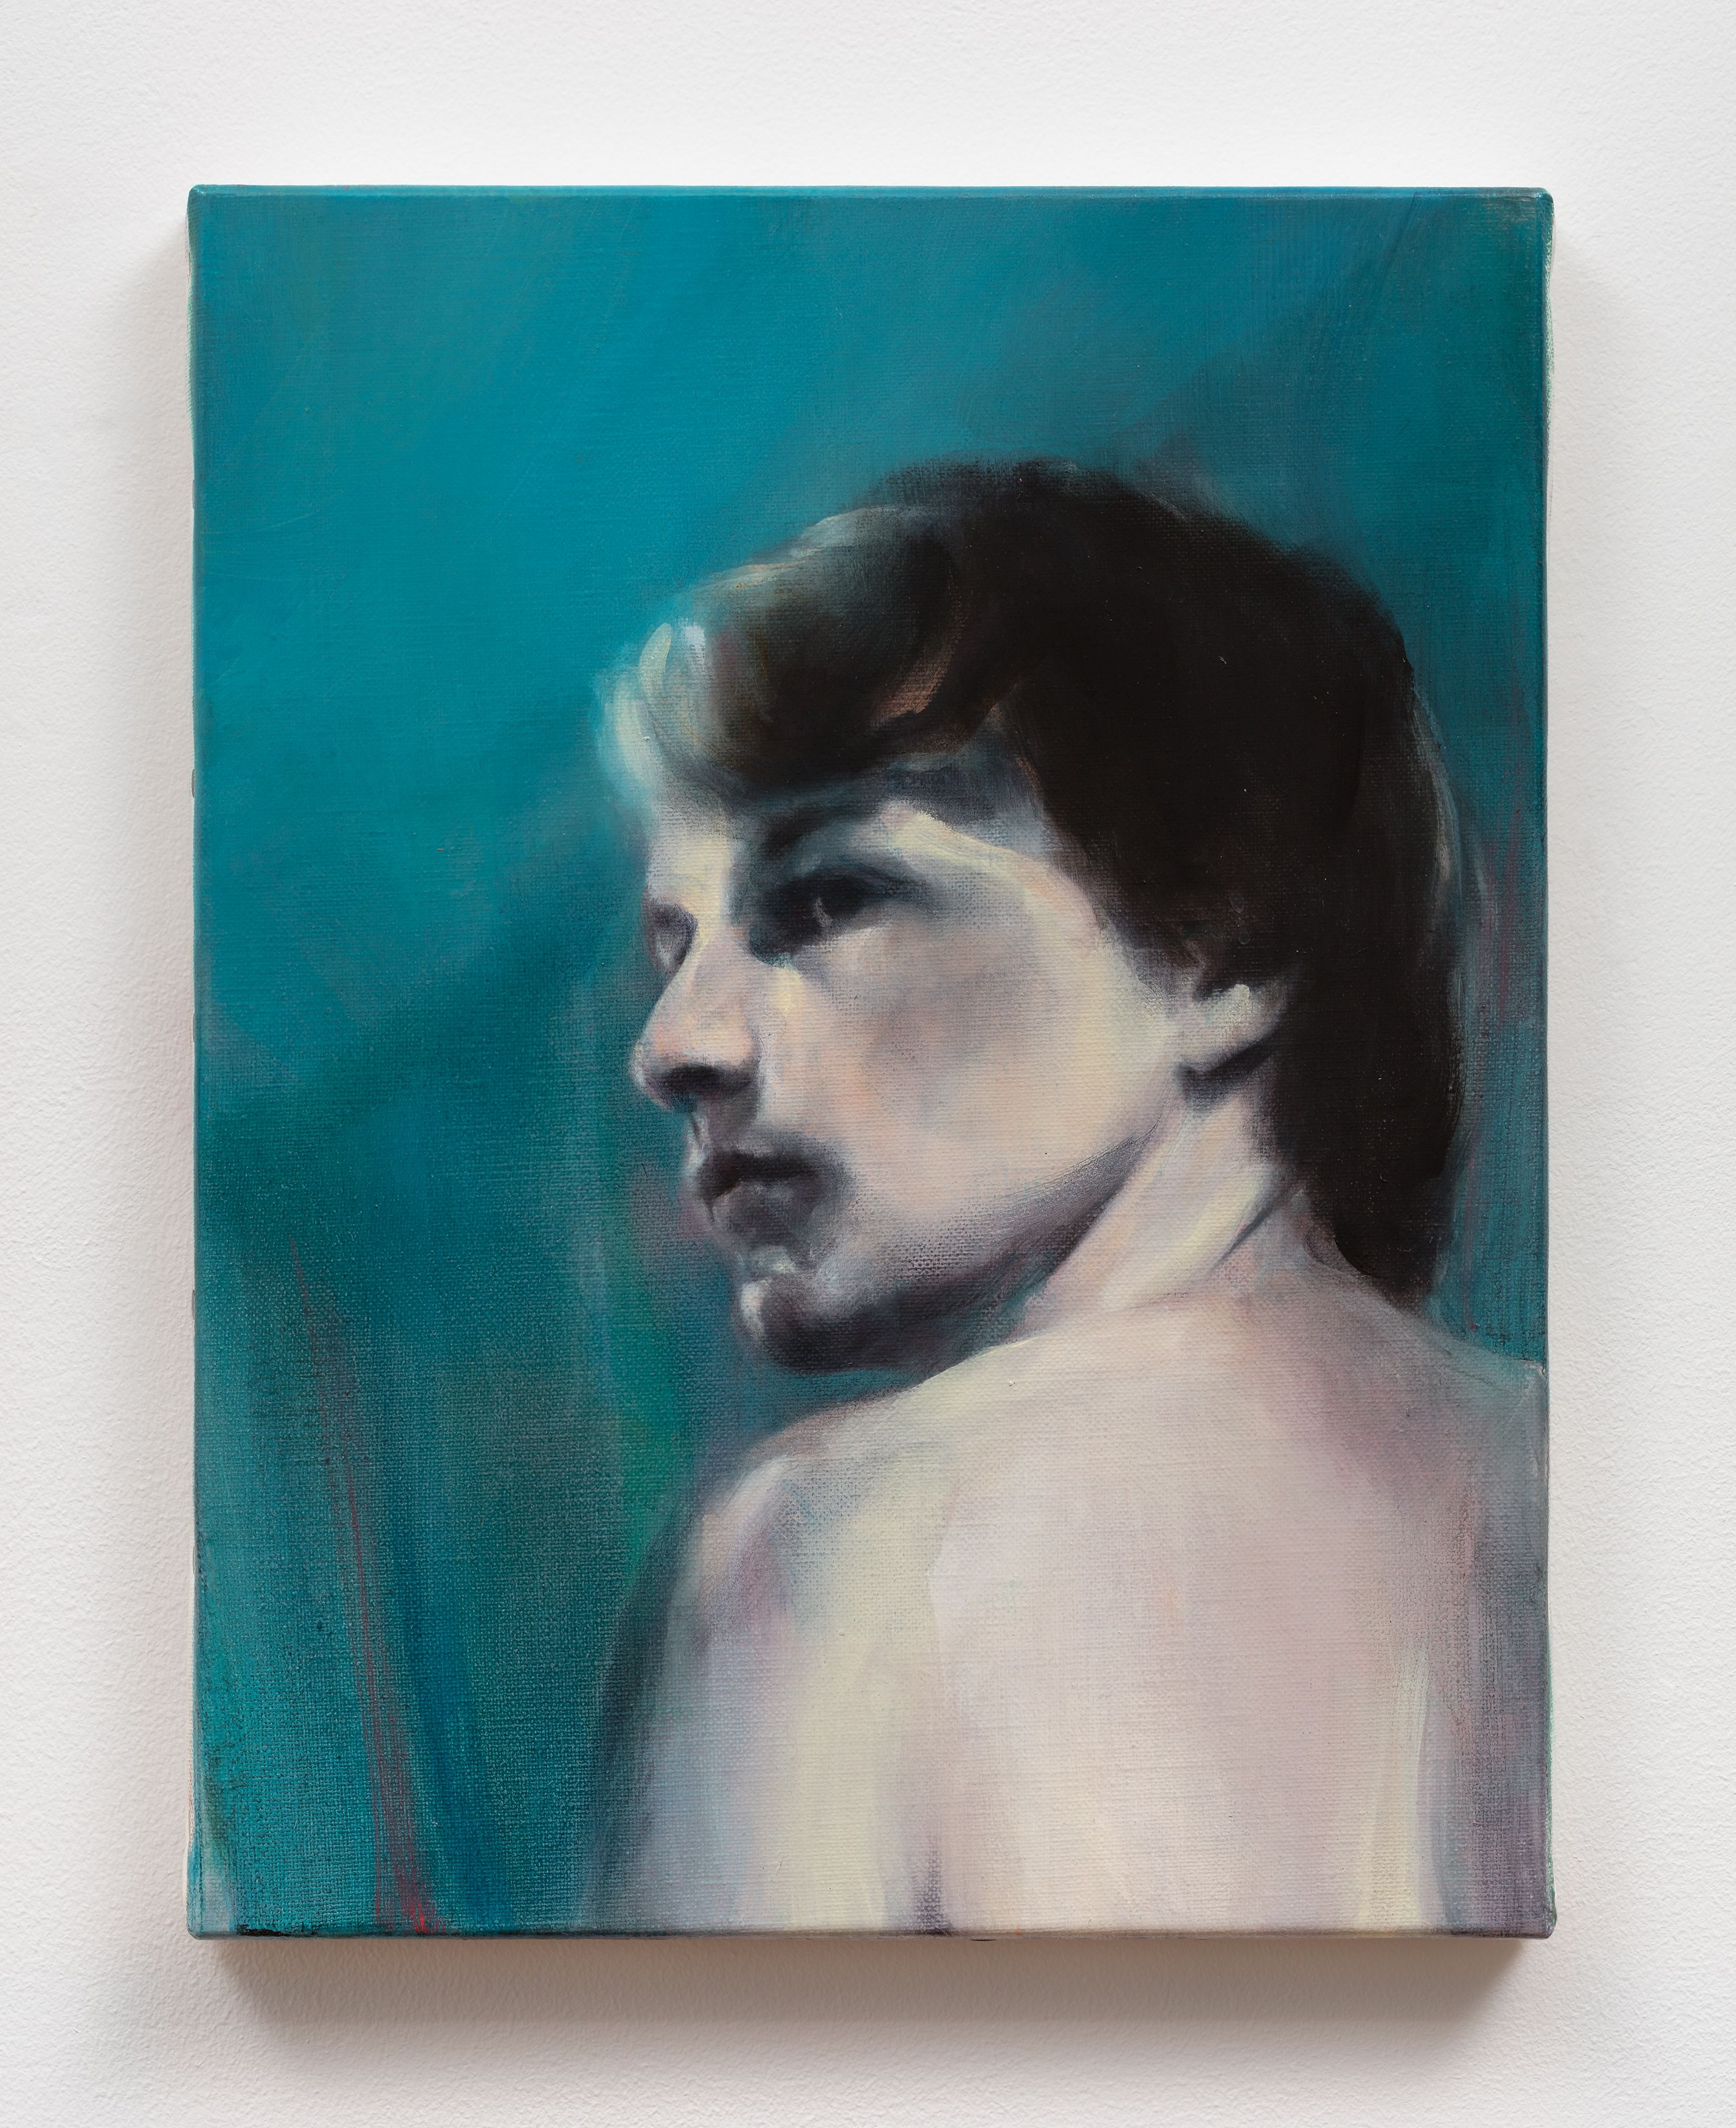 Paul P., Untitled, 2014, oil on canvas, 13 3⁄4 x 10 5⁄8 in. (34.92 x 26.99 cm)